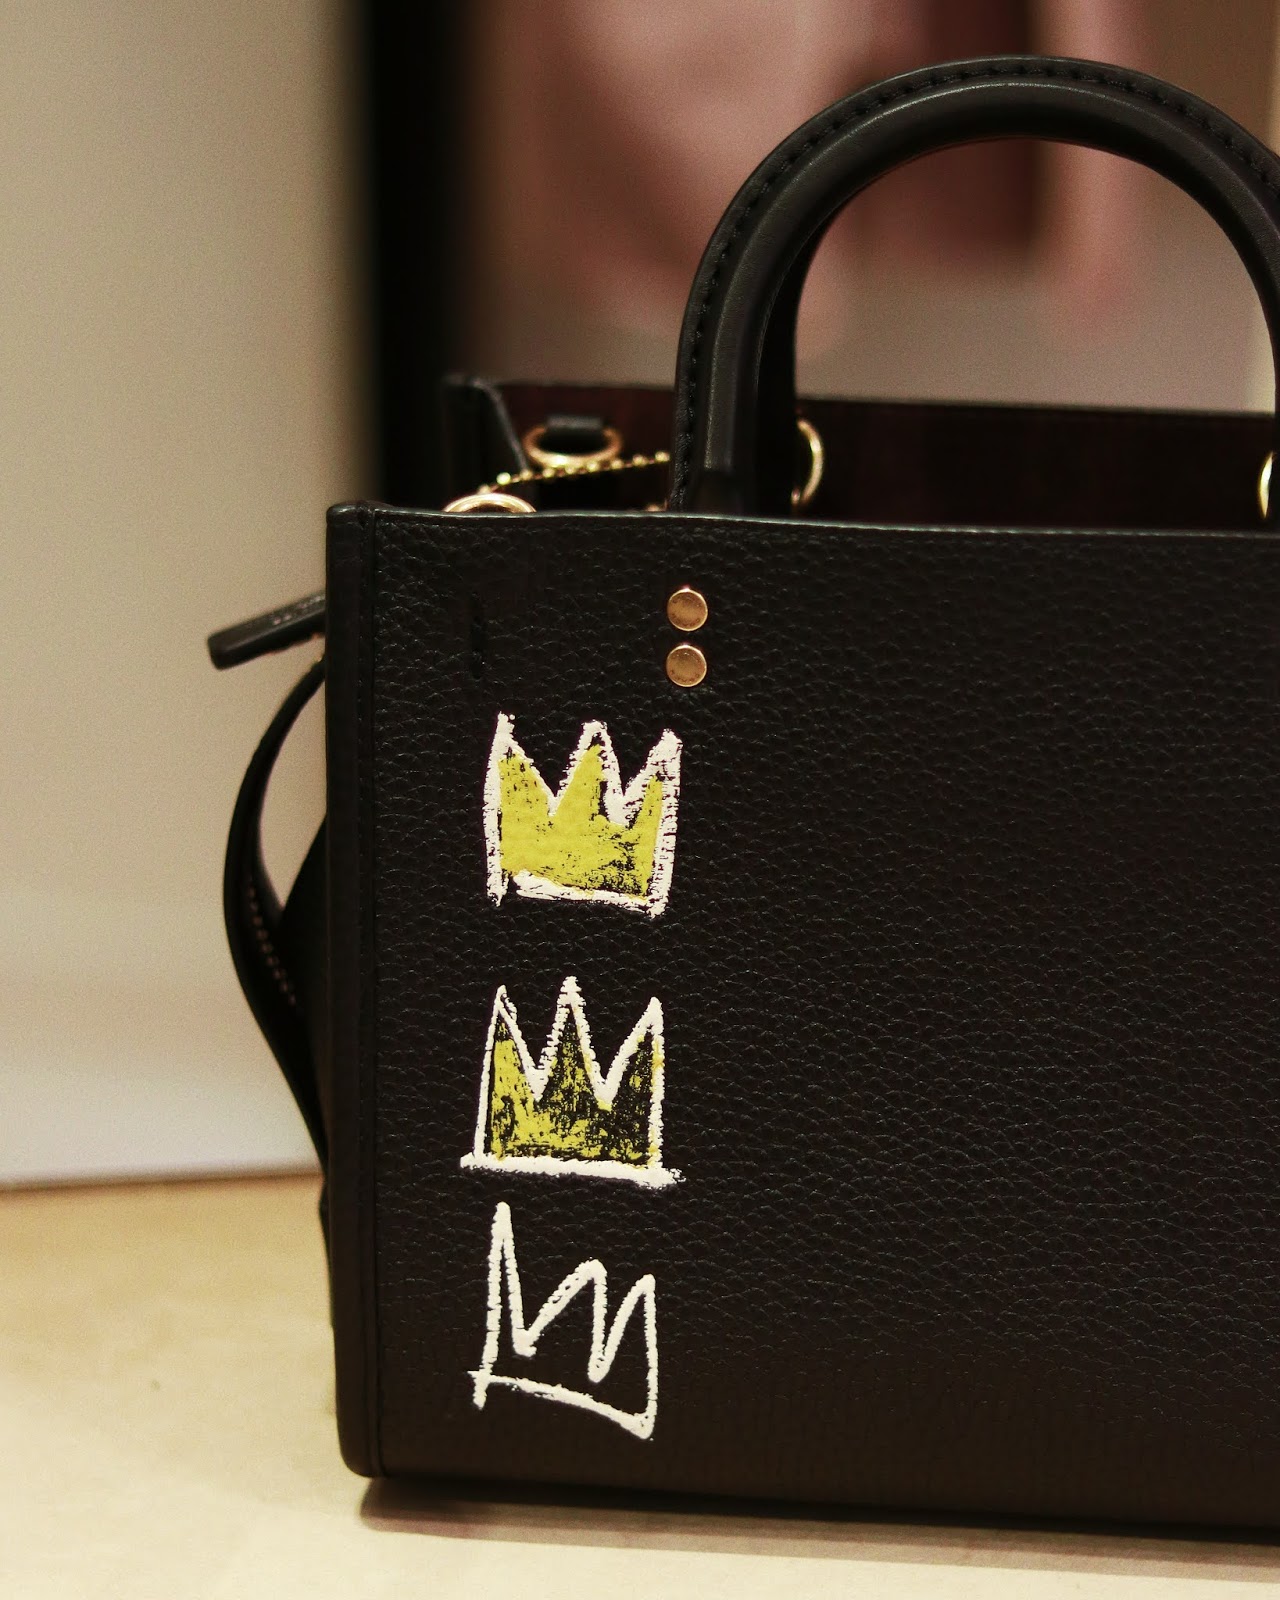 Coach x Jean-Michel Basquiat Collection now available in Malaysia